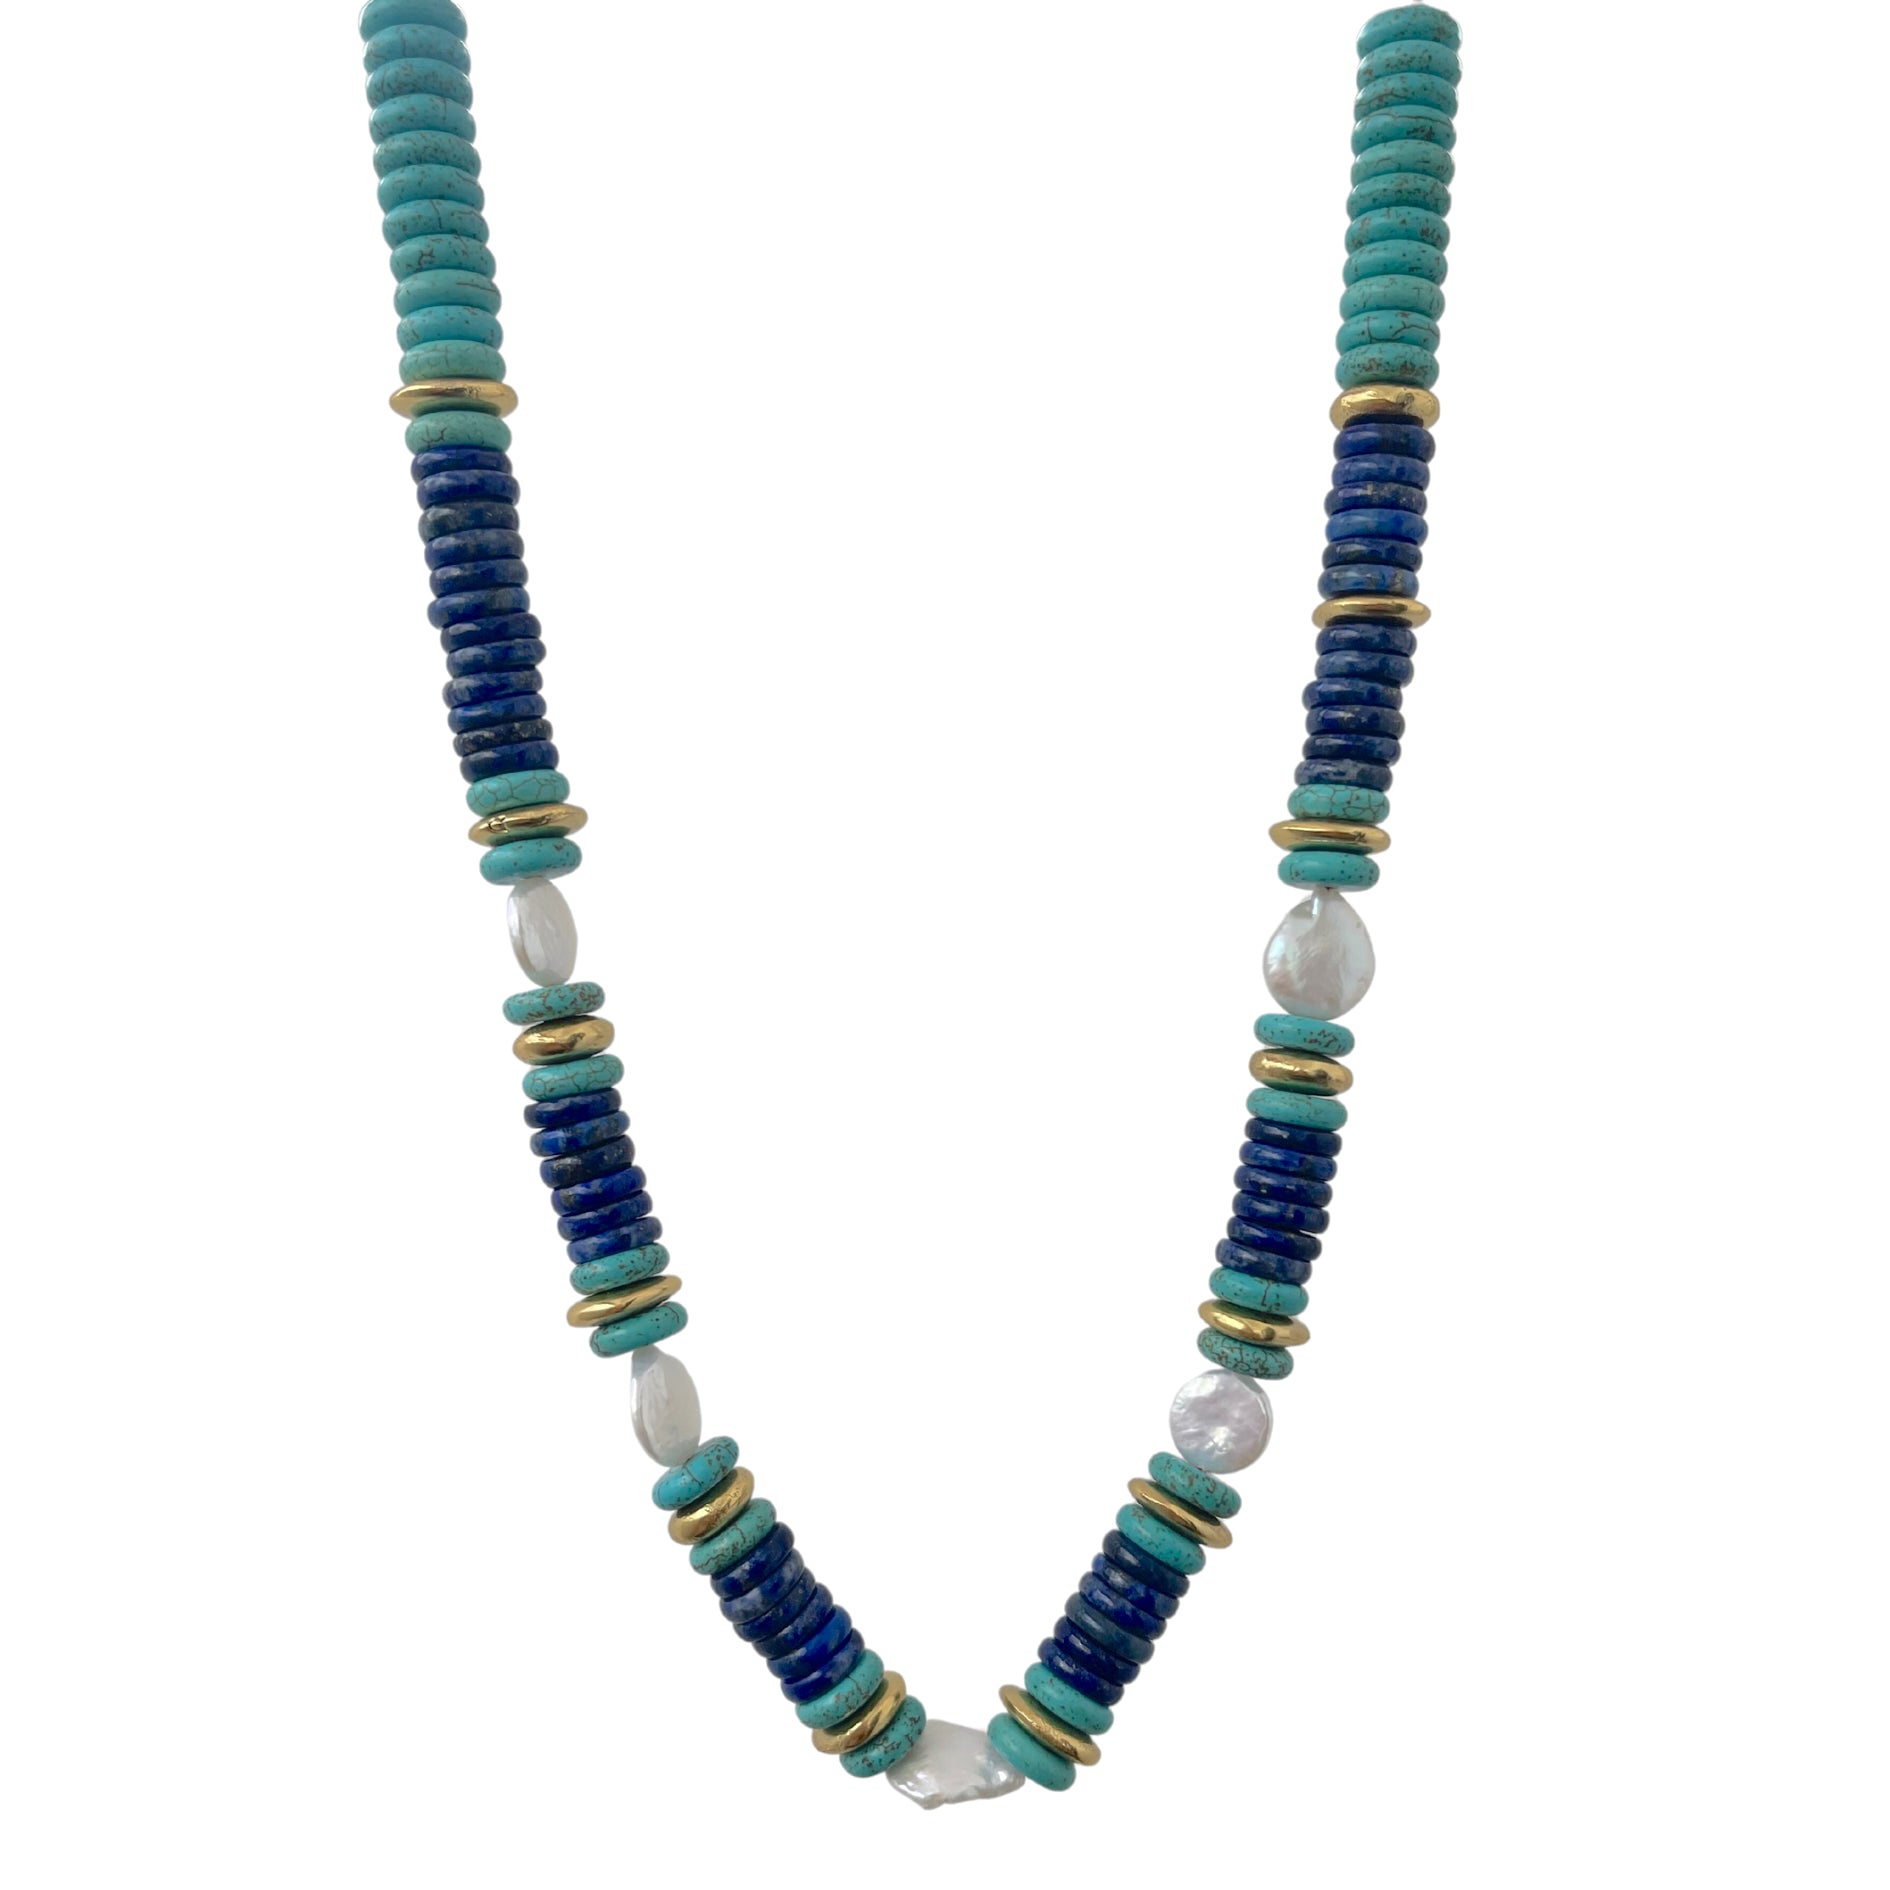 ISTANBUL CHUNKY TURQUOISE NECKLACE